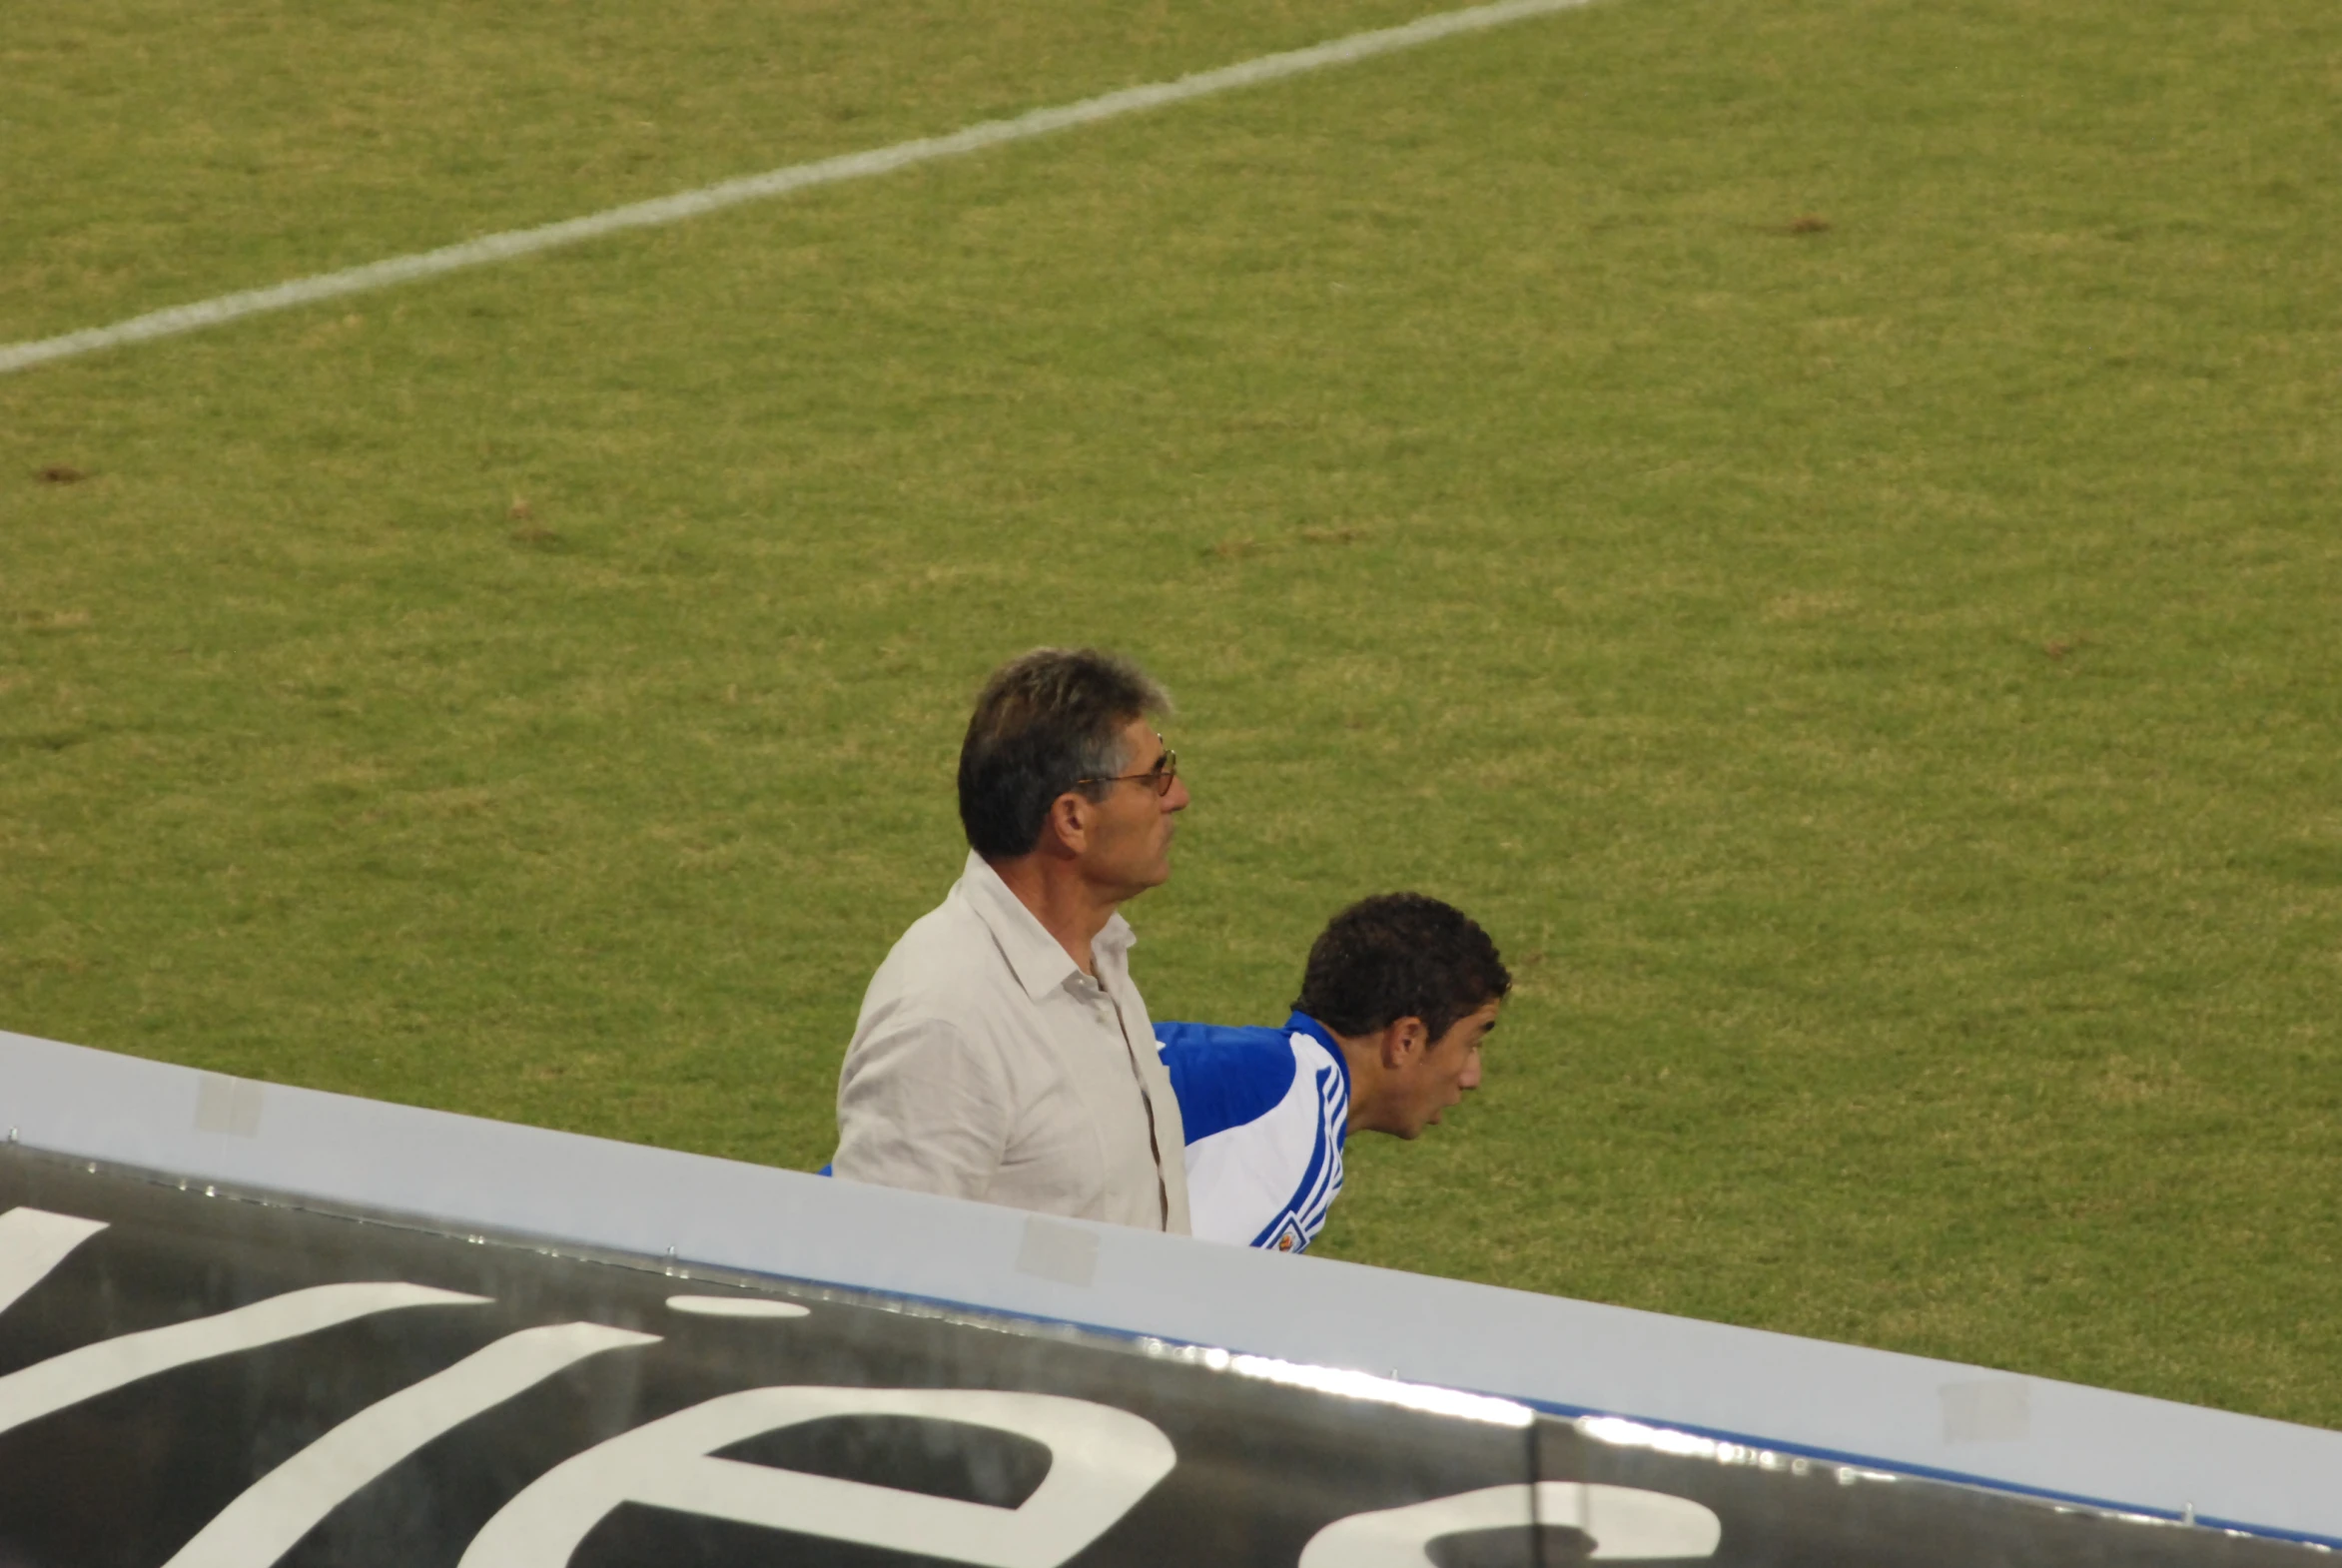 two men on a soccer field sitting on the sidelines